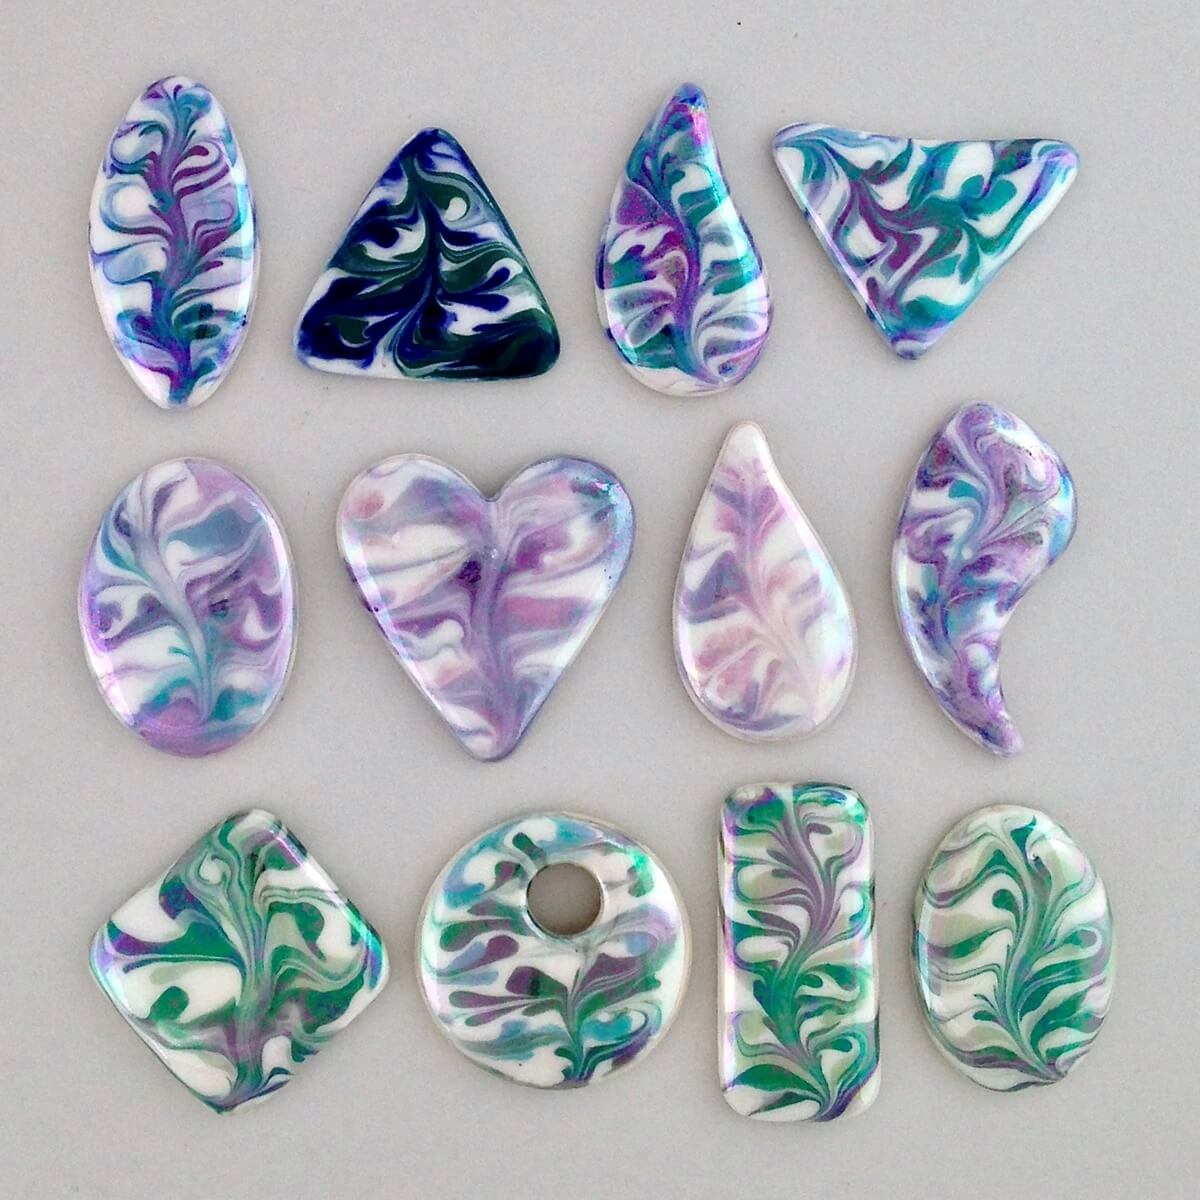 Marbled geometric cabochons for your unique jewelry designs.